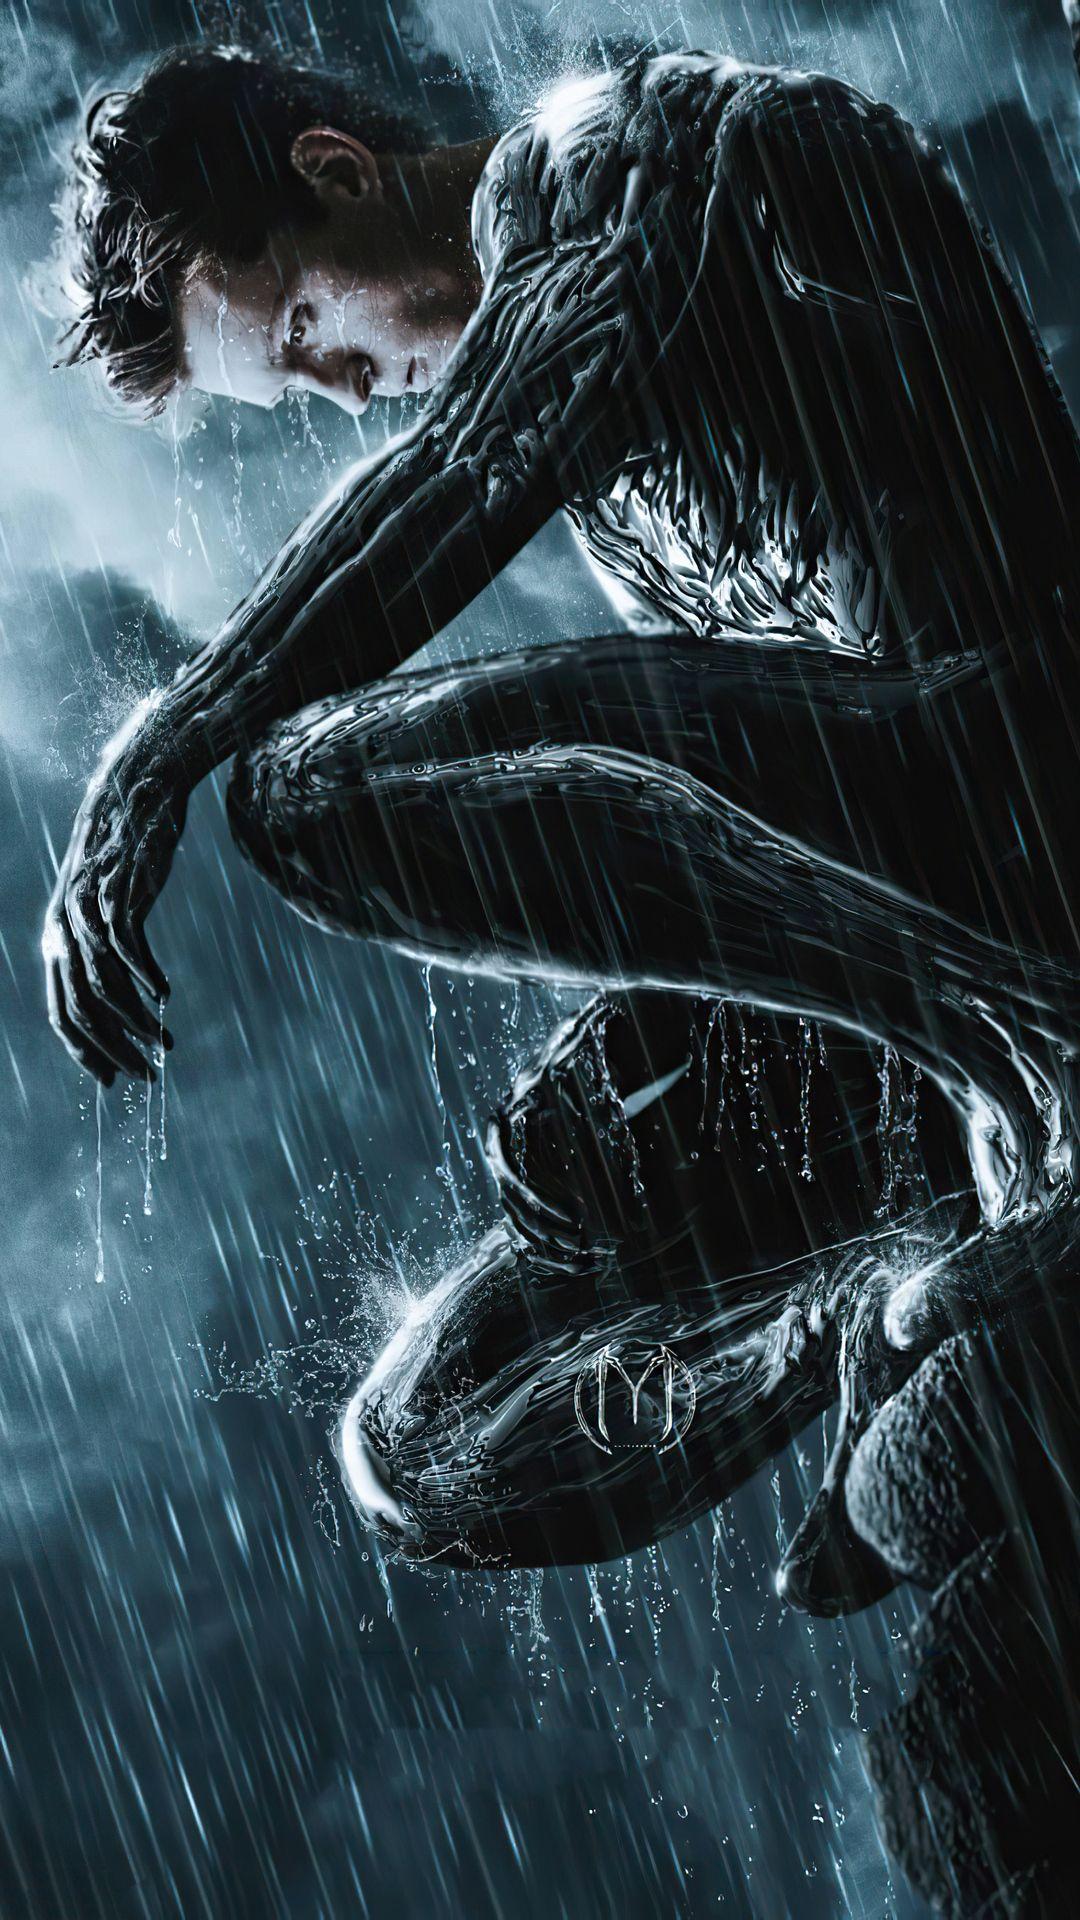 Removed the text from the Sam Raimi SpiderMan 3 posters and converted them  into Mobile Wallpapers 2007 2160 x 3840 2160 x 4677  rSpiderman